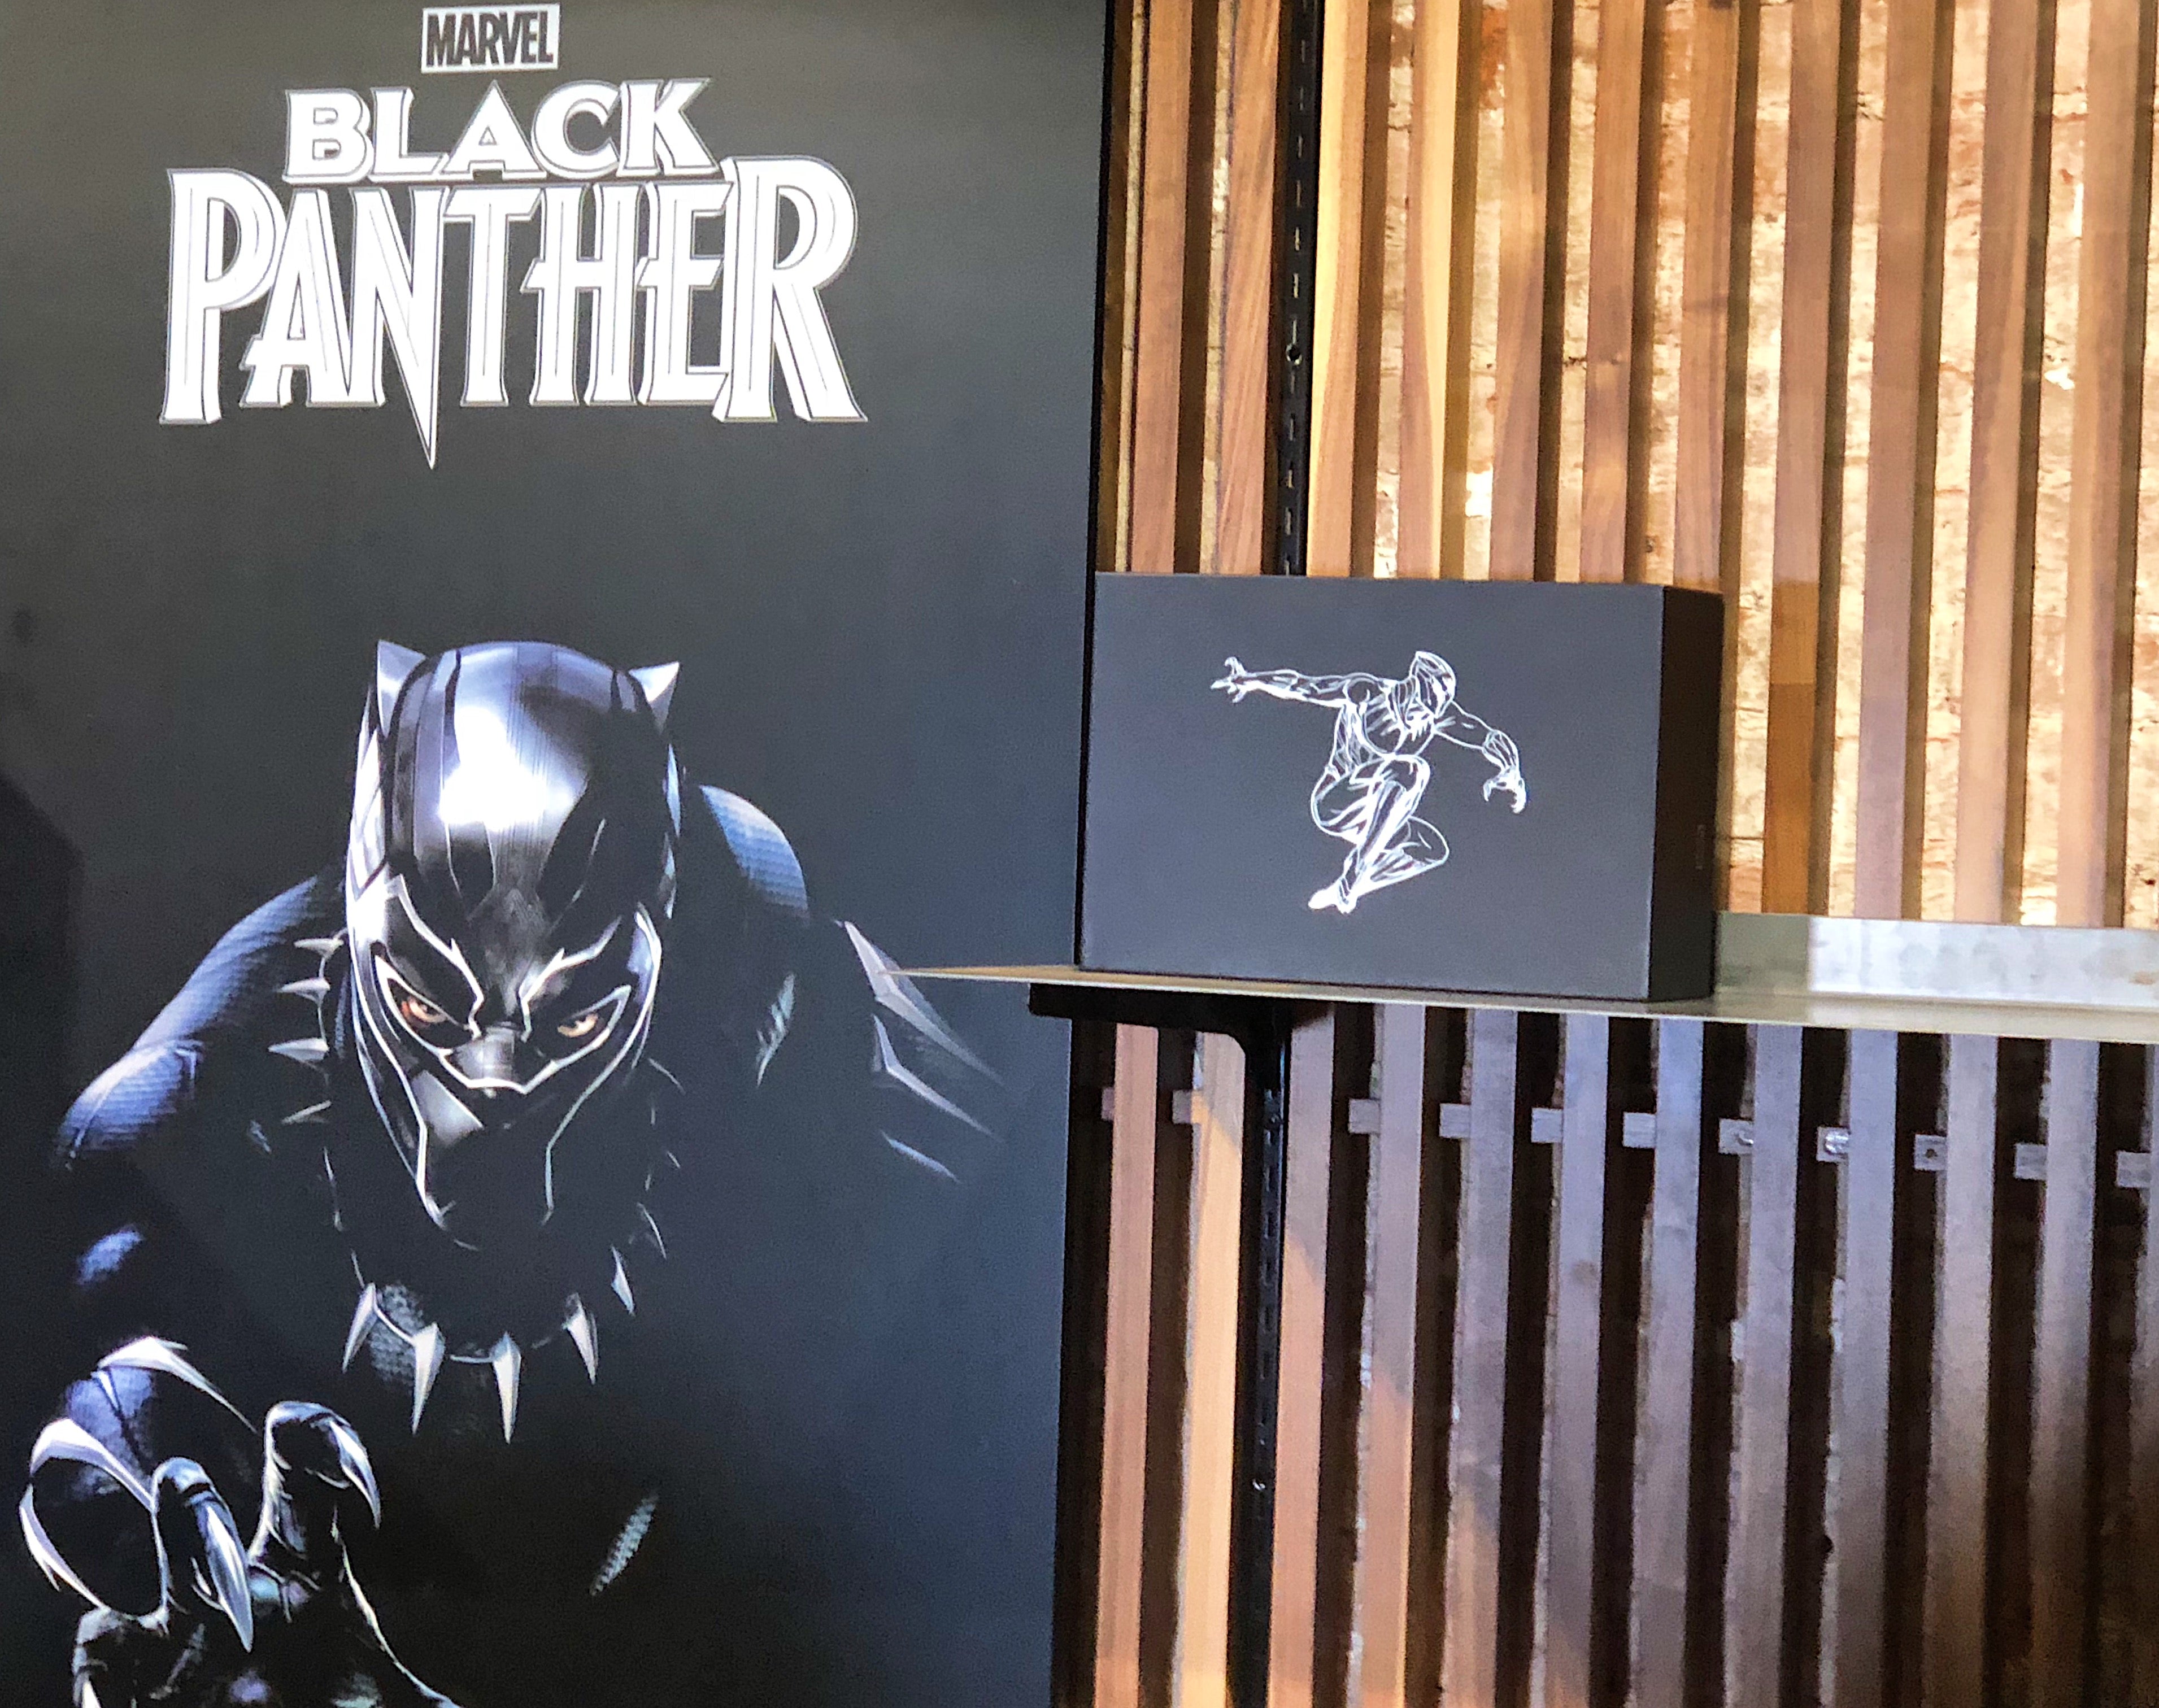 Clarks x Black Panther with costume designer, Ruth E. Carter card image